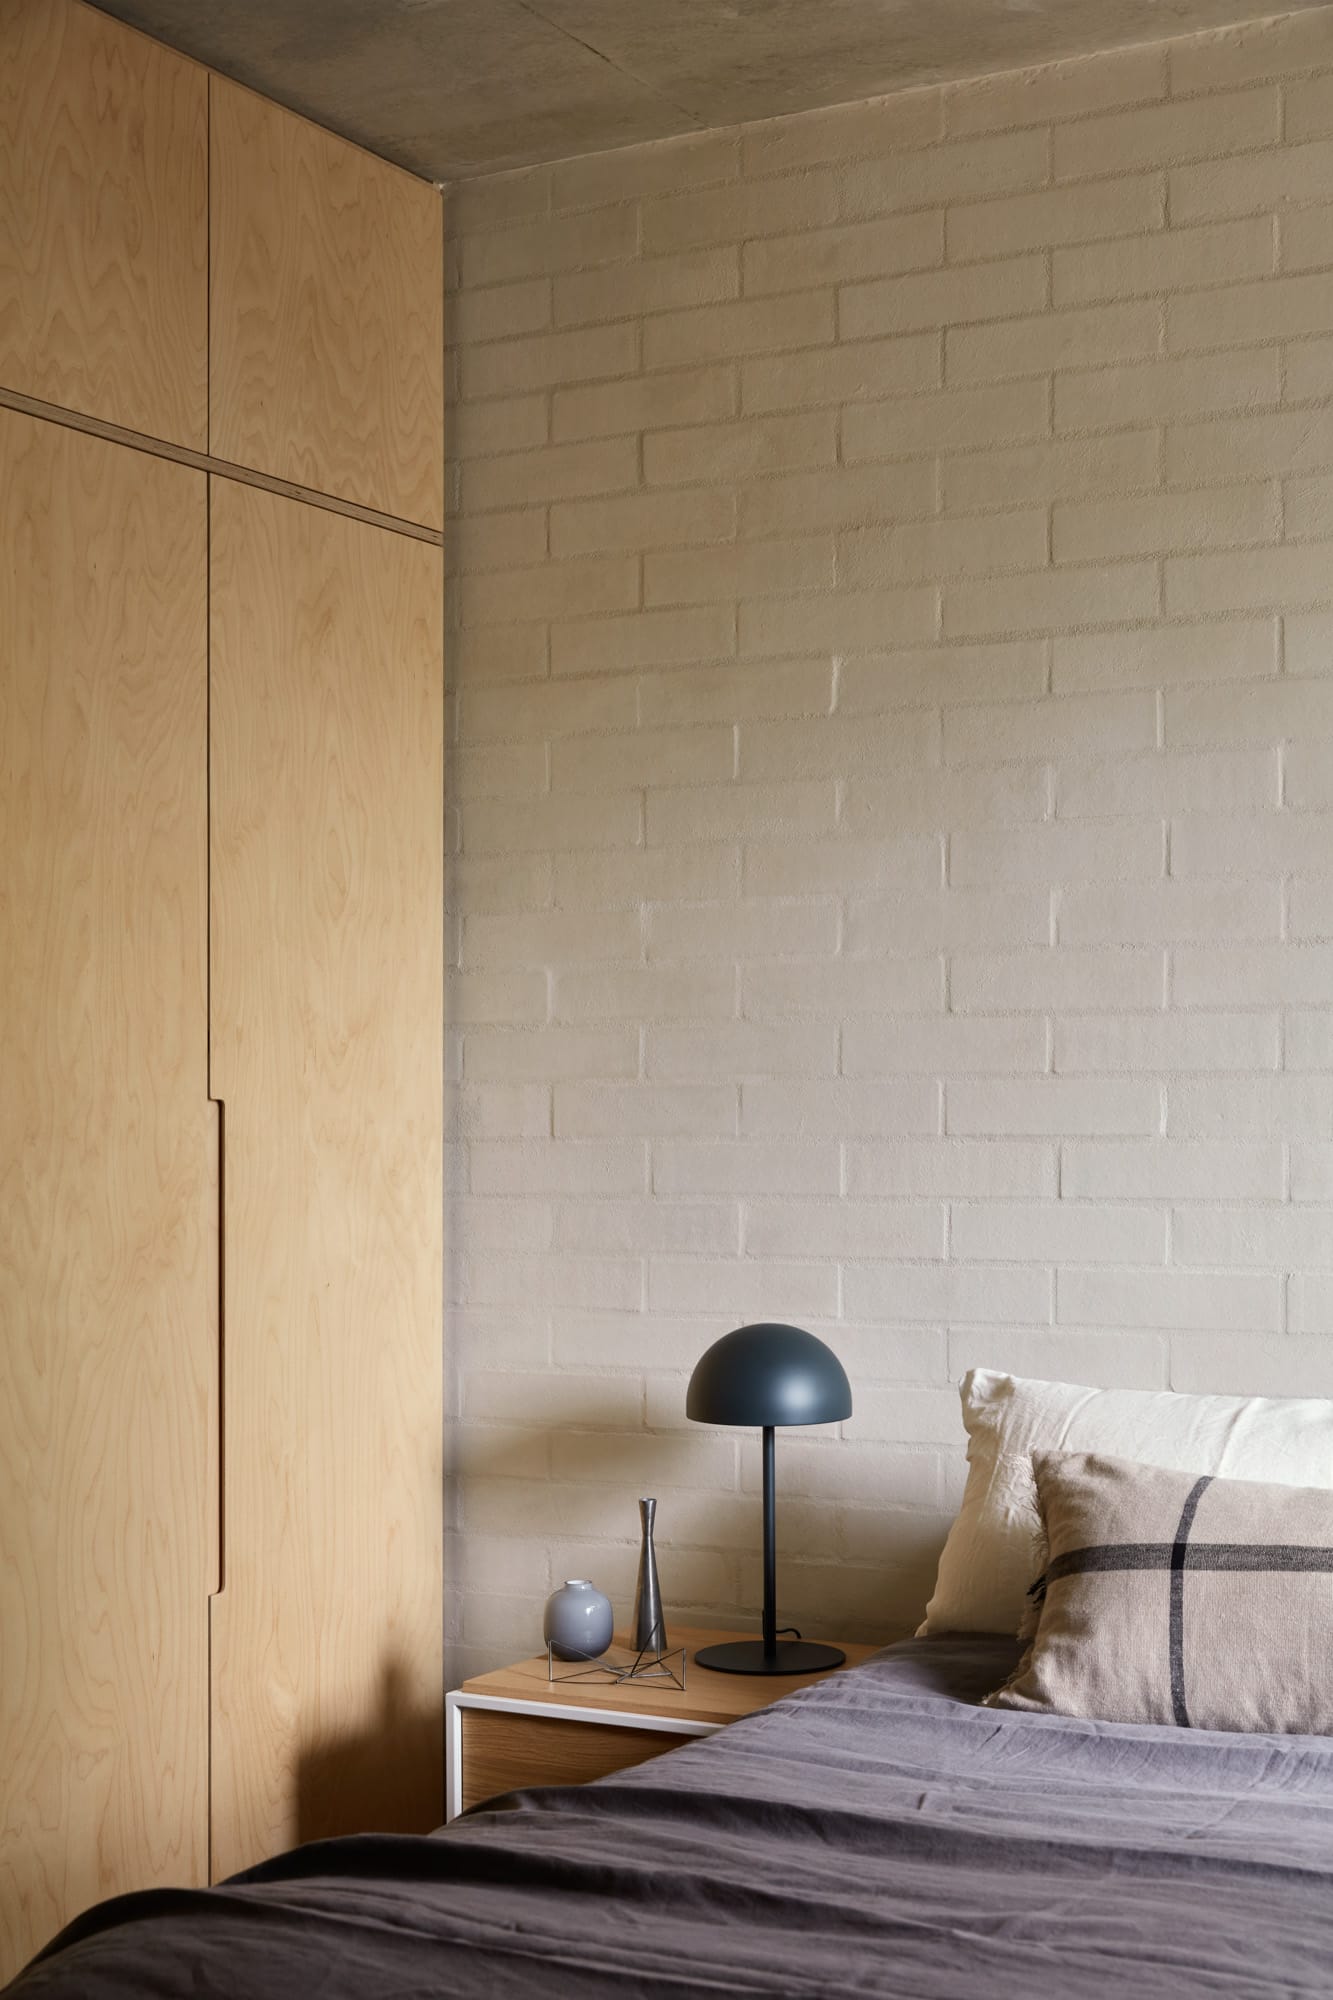  Brick House by Studio Roam. Photography by Jack Lovel. Bedroom with plywood wardrobes and white brick walls. Grey linen on bed. Timber bedside table with black lamp. 